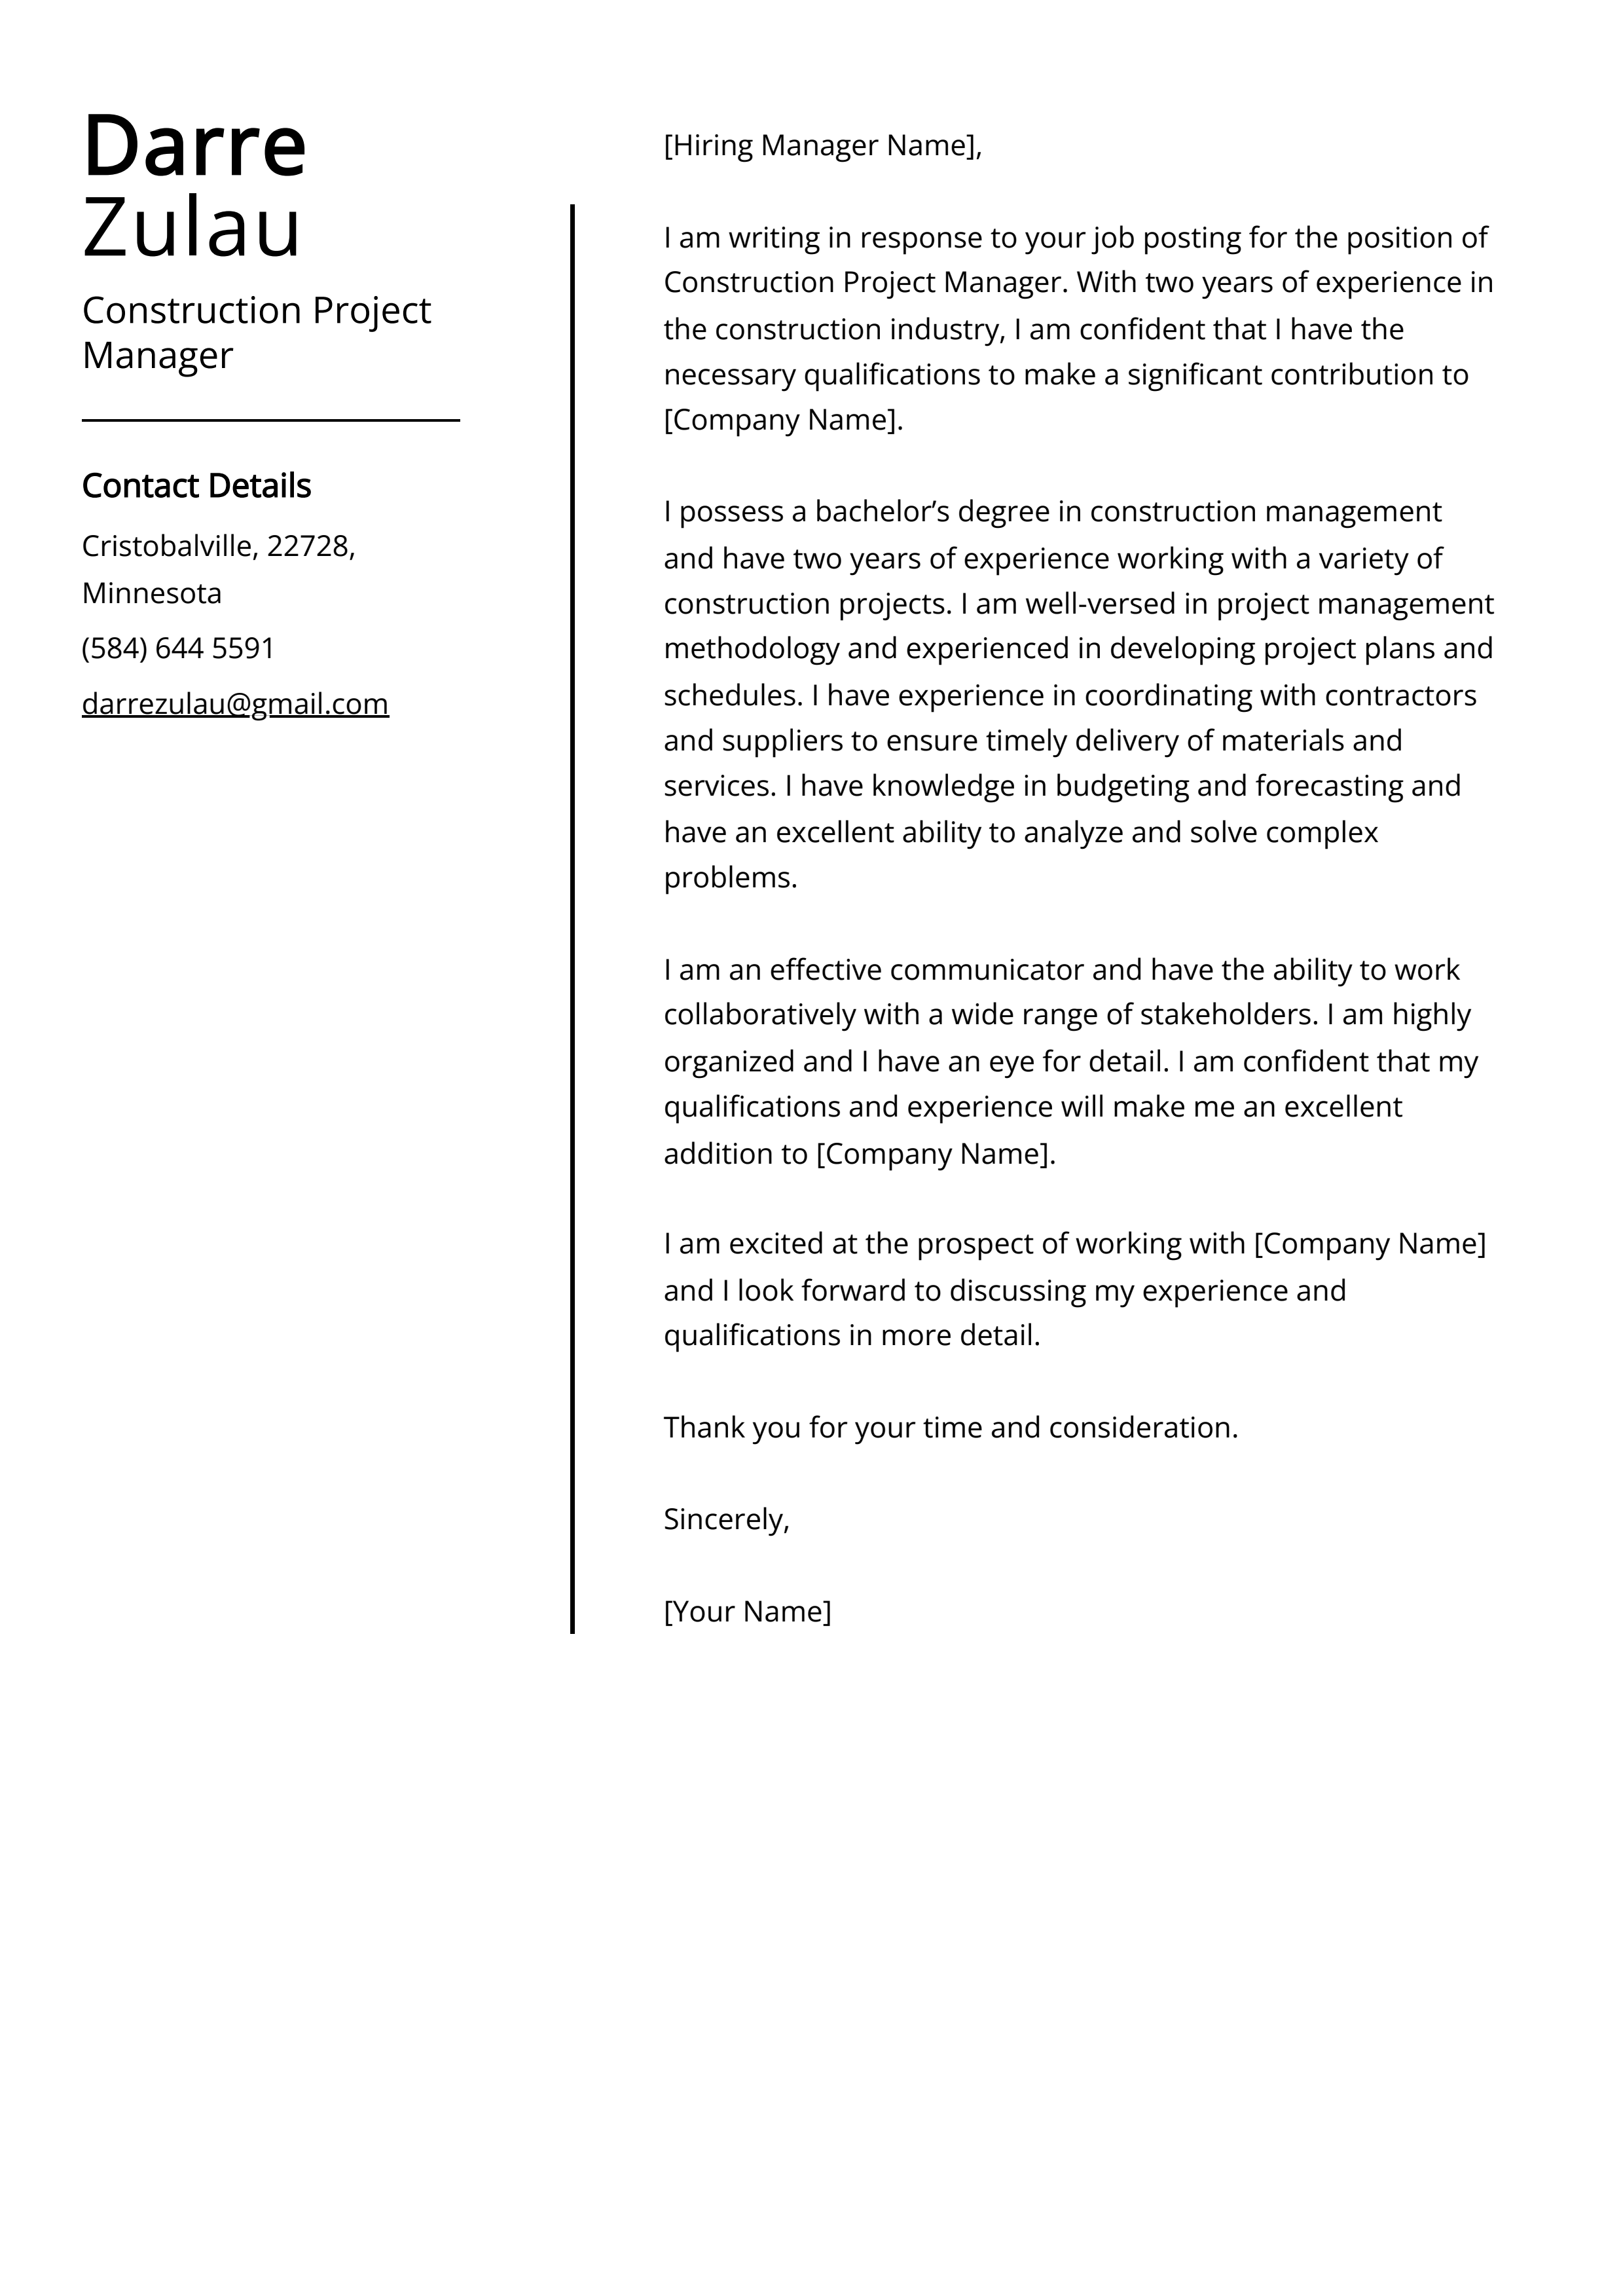 Construction Project Manager Cover Letter Example